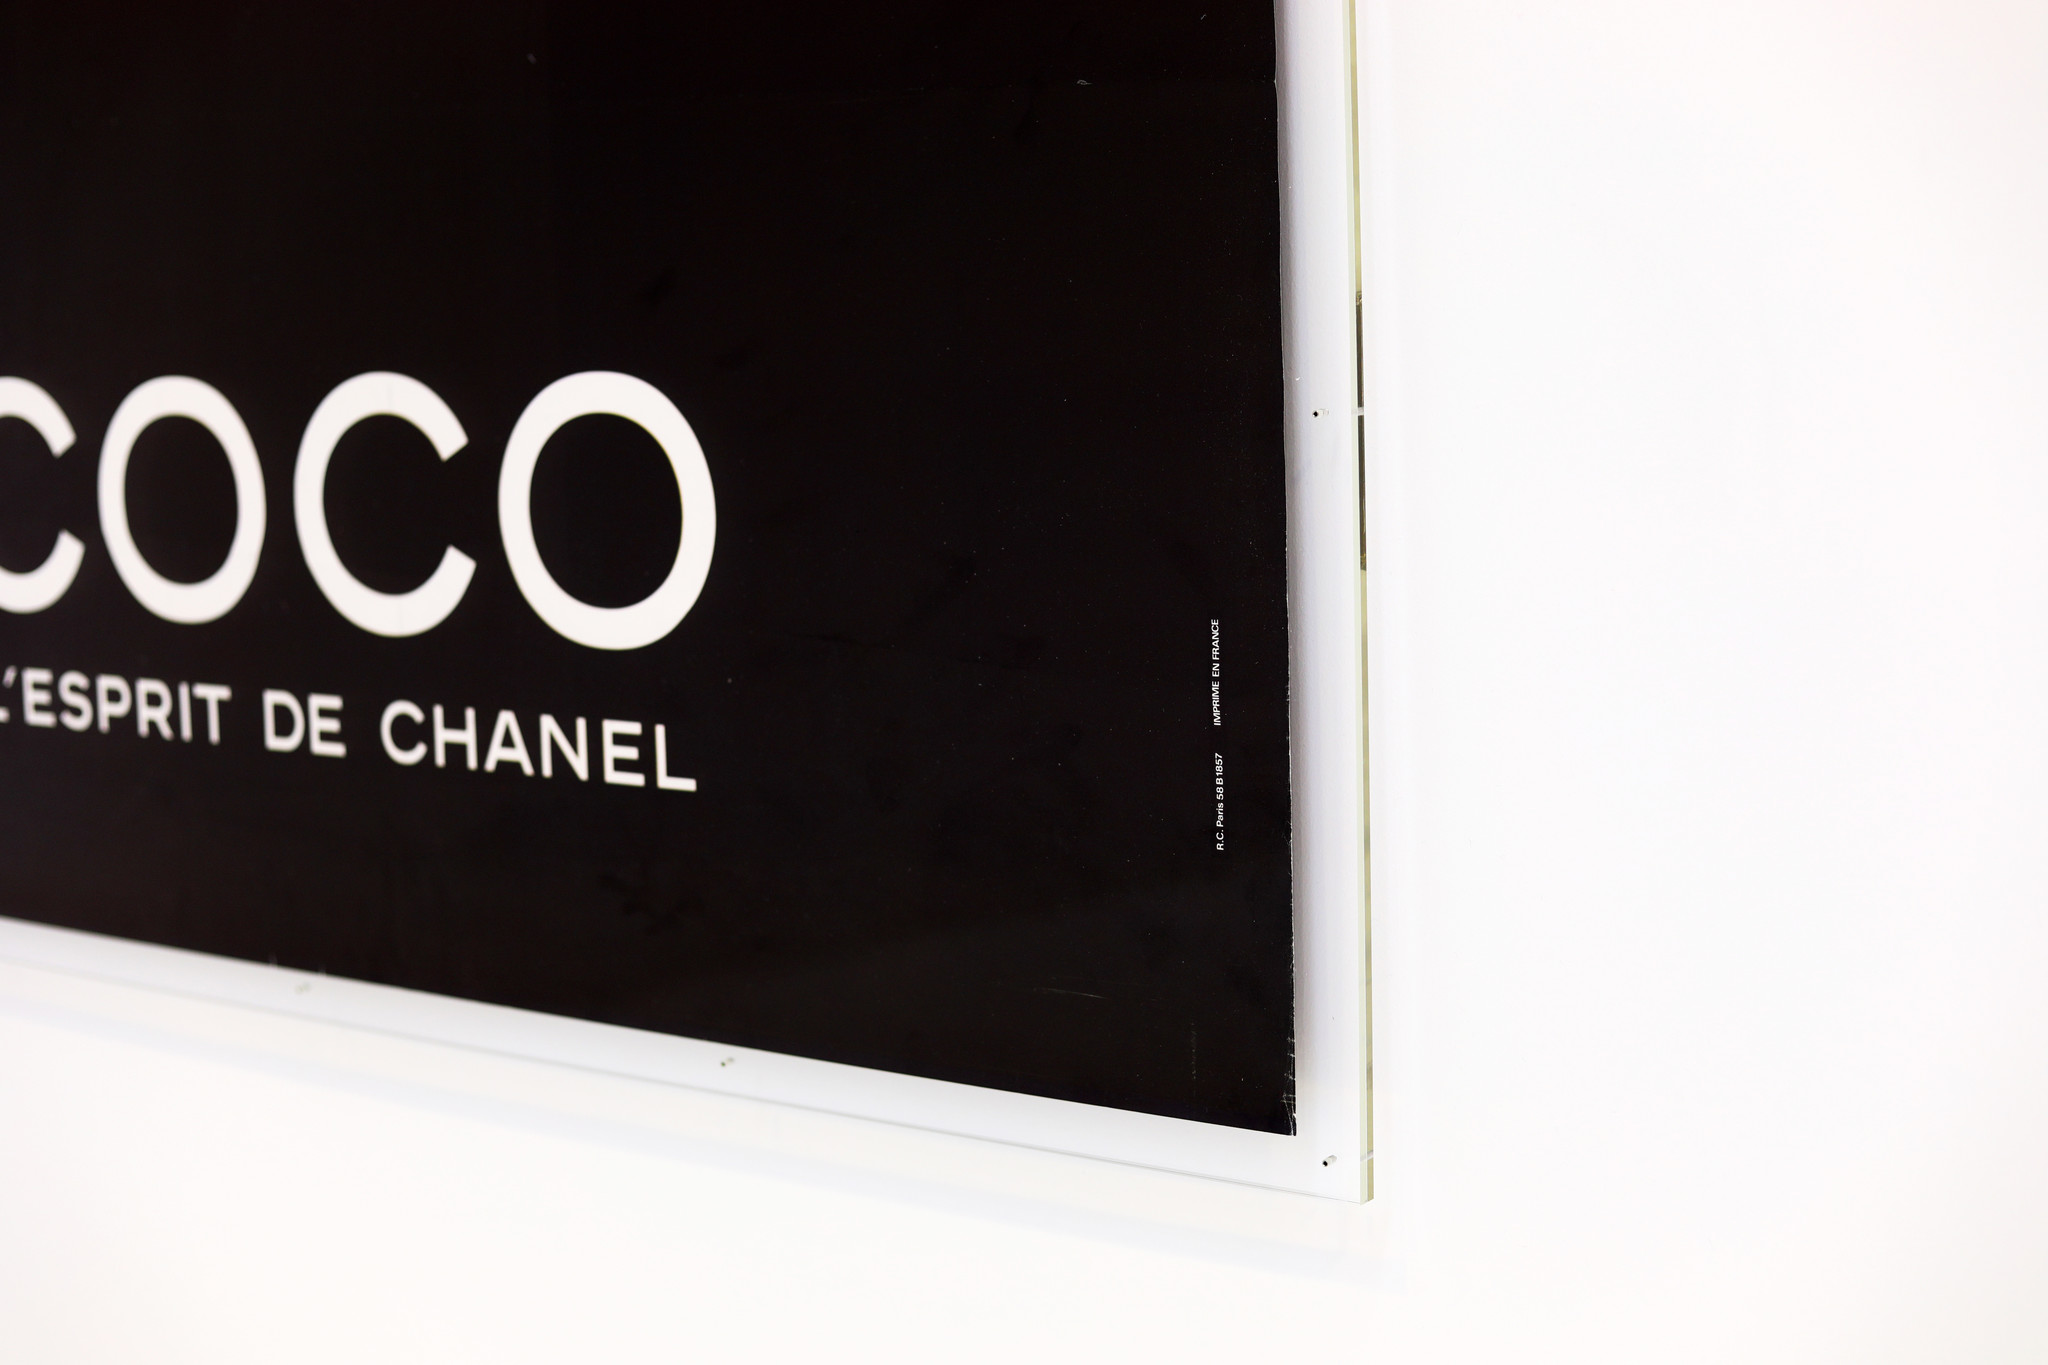 ORIGINAL XXL POSTER COCO L'ESPRIT CHANEL, 1991 - THE HOUSE OF WAUW